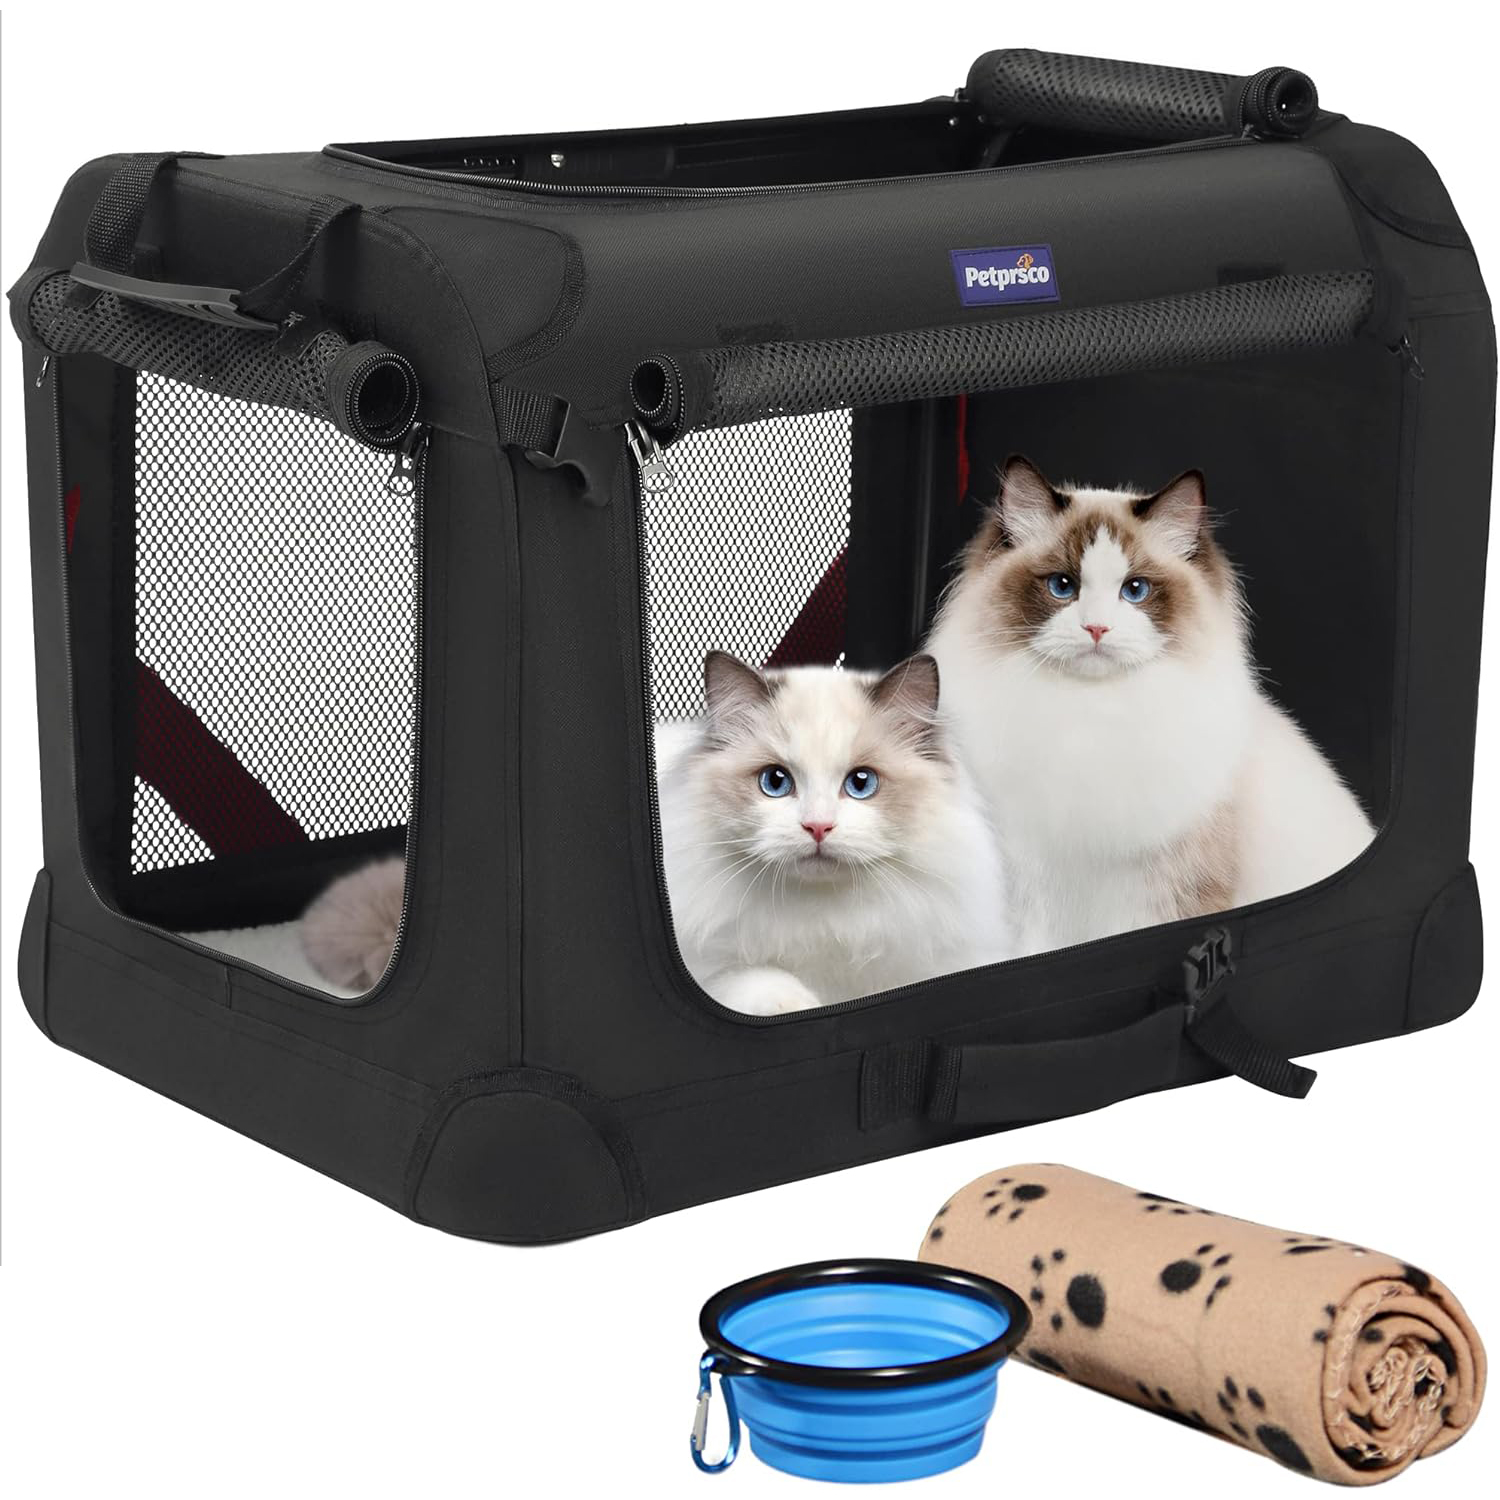 petprsco Large Cat Carrier for 2 Cats